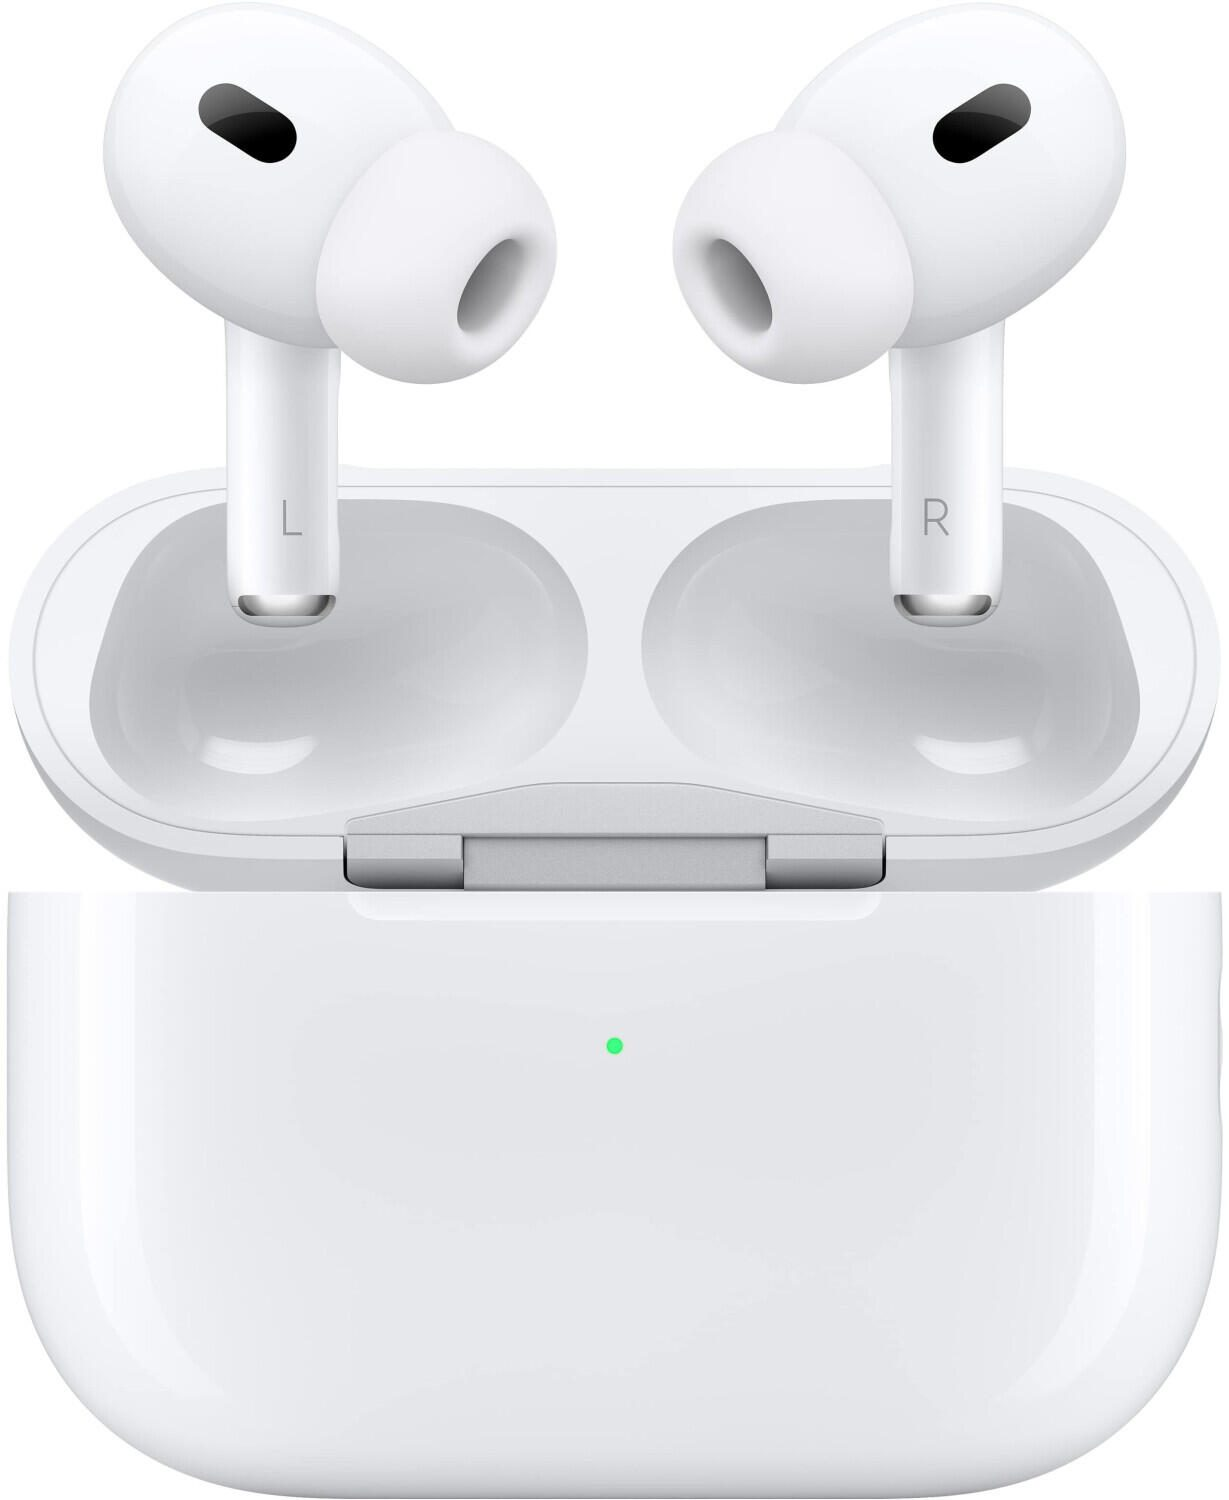 Pro 2. weiß, AirPods Apple Ladecase, APPLE AirPods In-ear MagSafe Generation whitesmoke Bluetooth